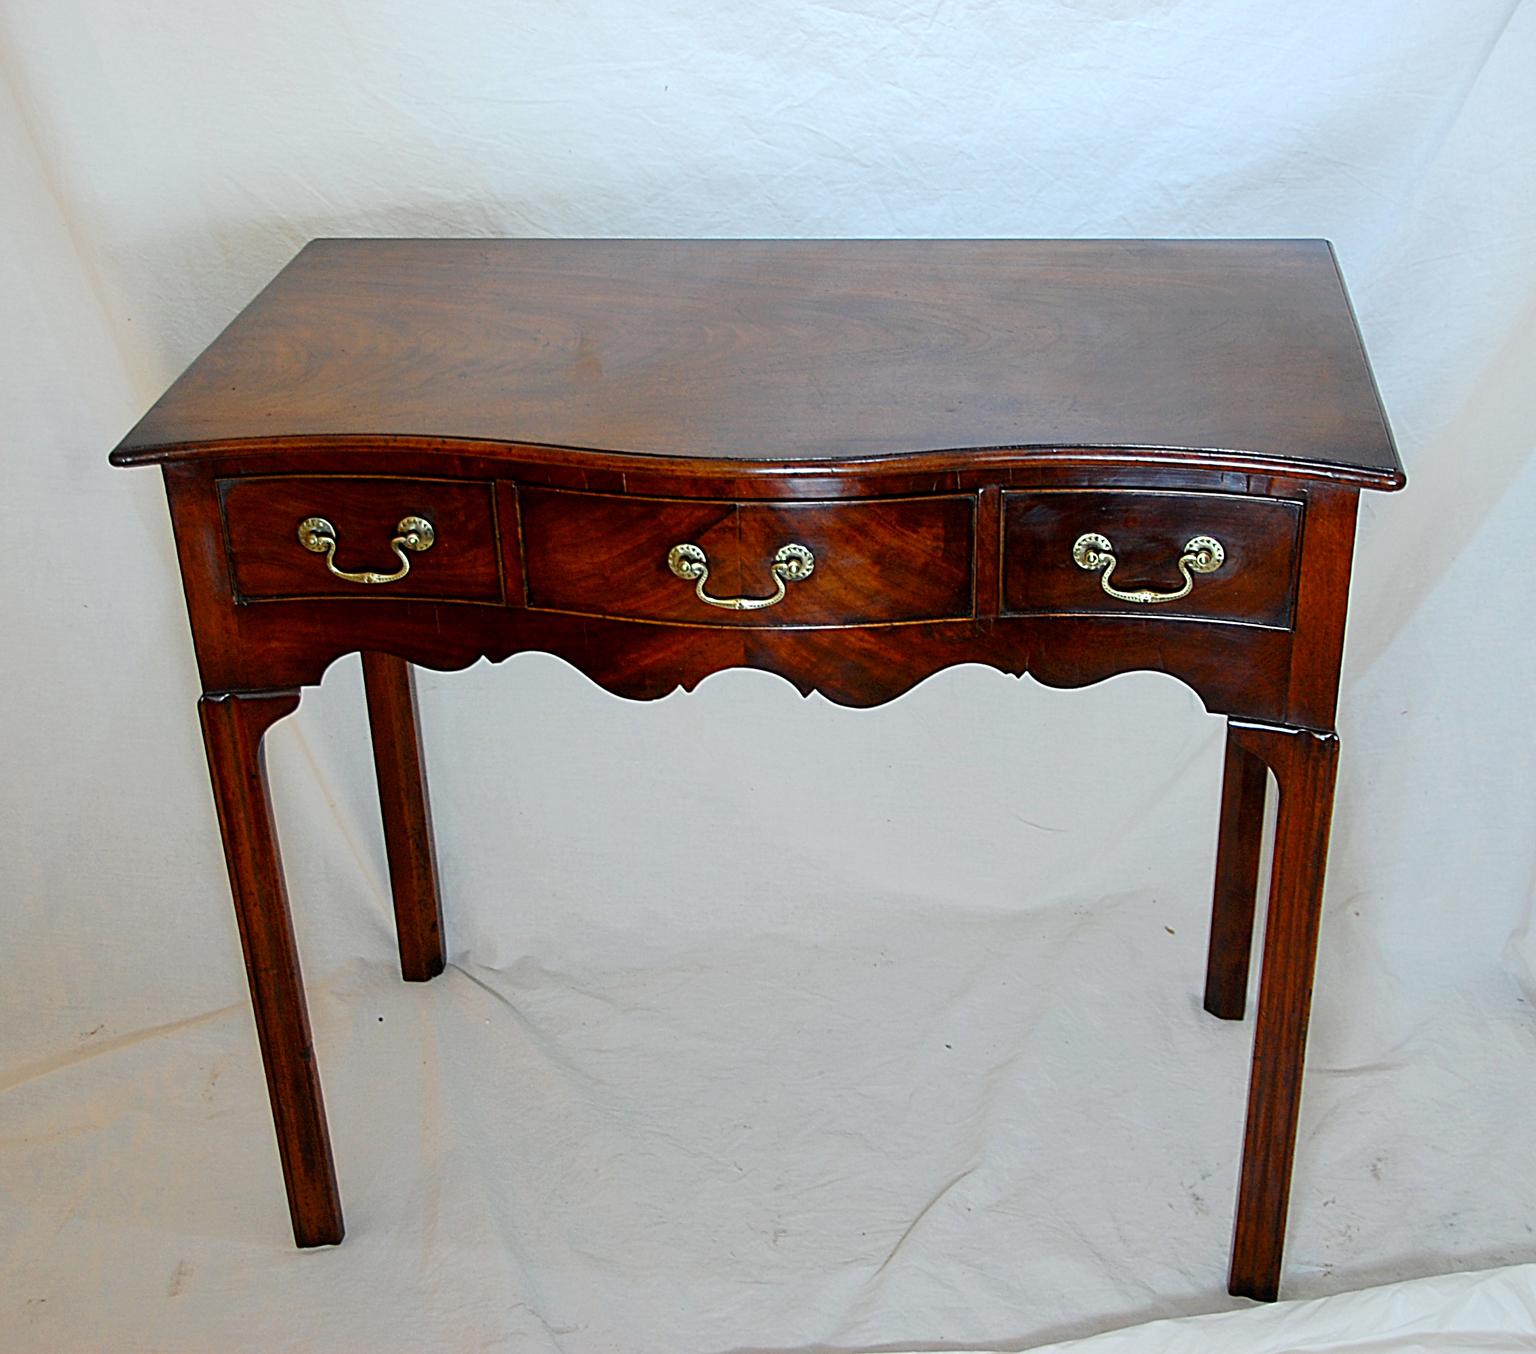 English George II period Chippendale mahogany dressing table. This fine table has a serpentine carcass as well as top. The three drawers are veneered, the center drawer with bookmatched mahogany, the carcass is of solid mahogany, the drawers are